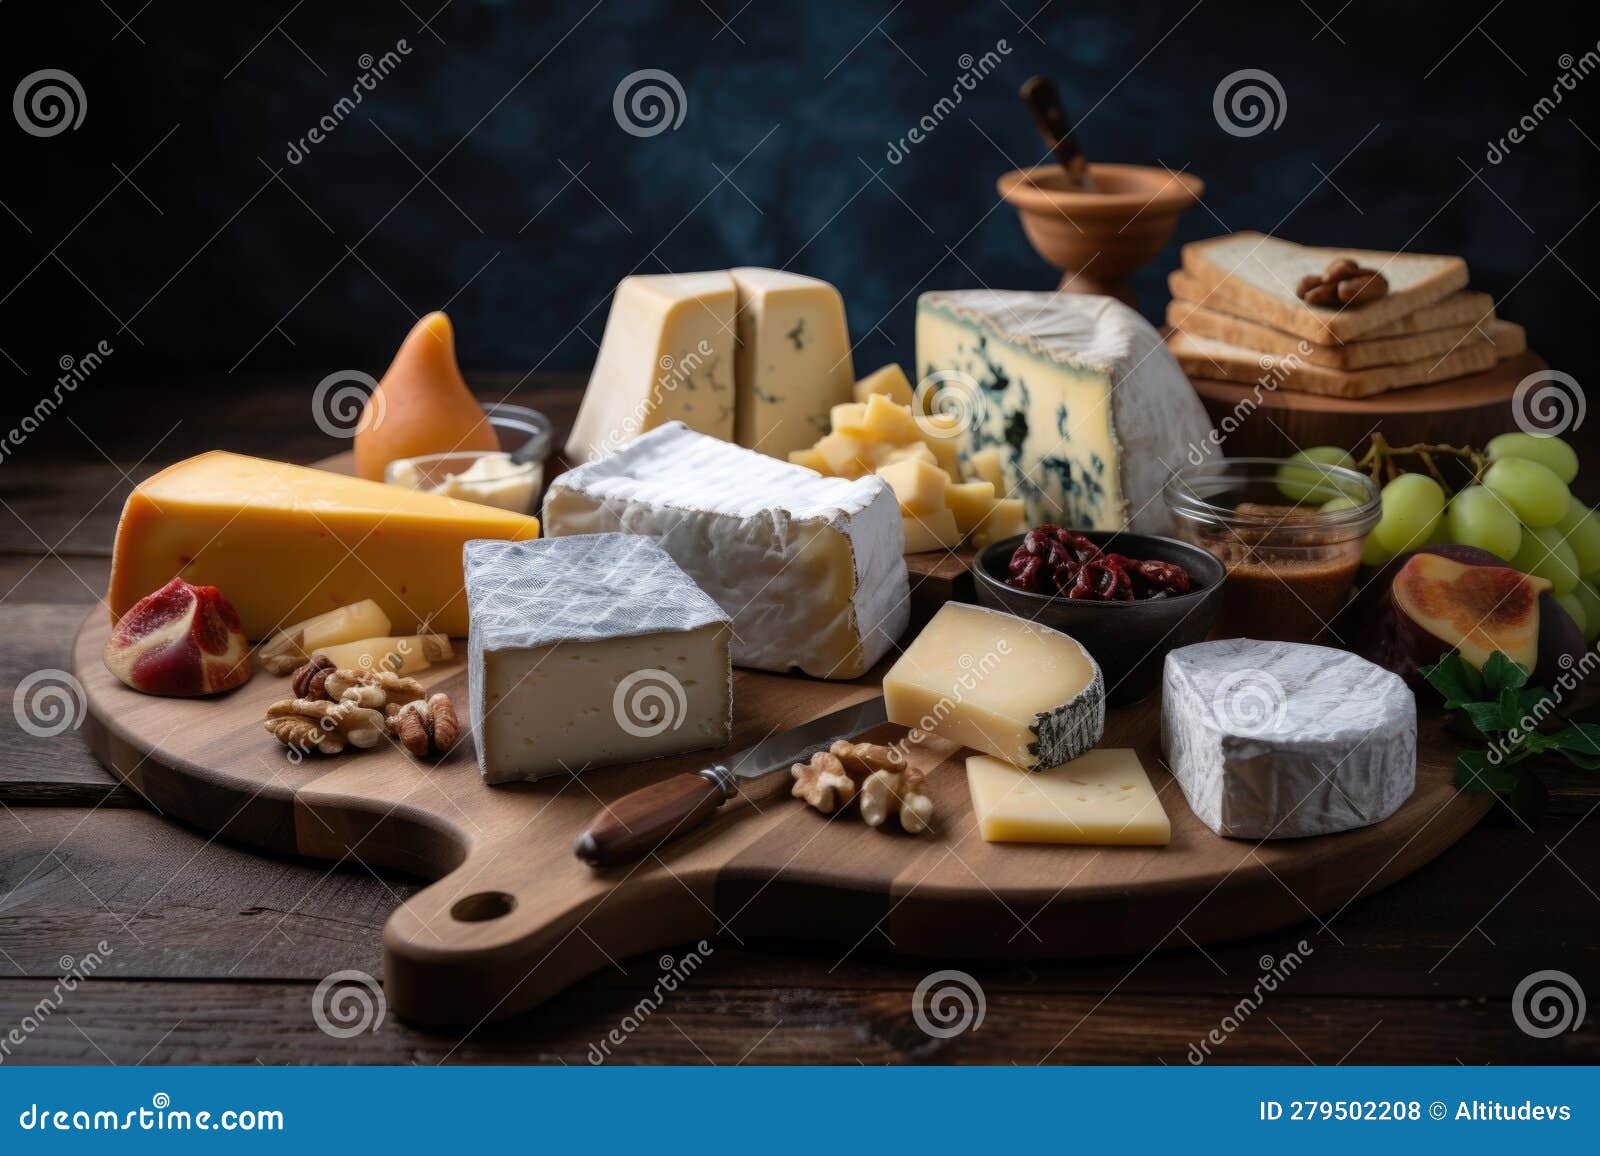 classic cheeseboard with variety of ferments and cheeses